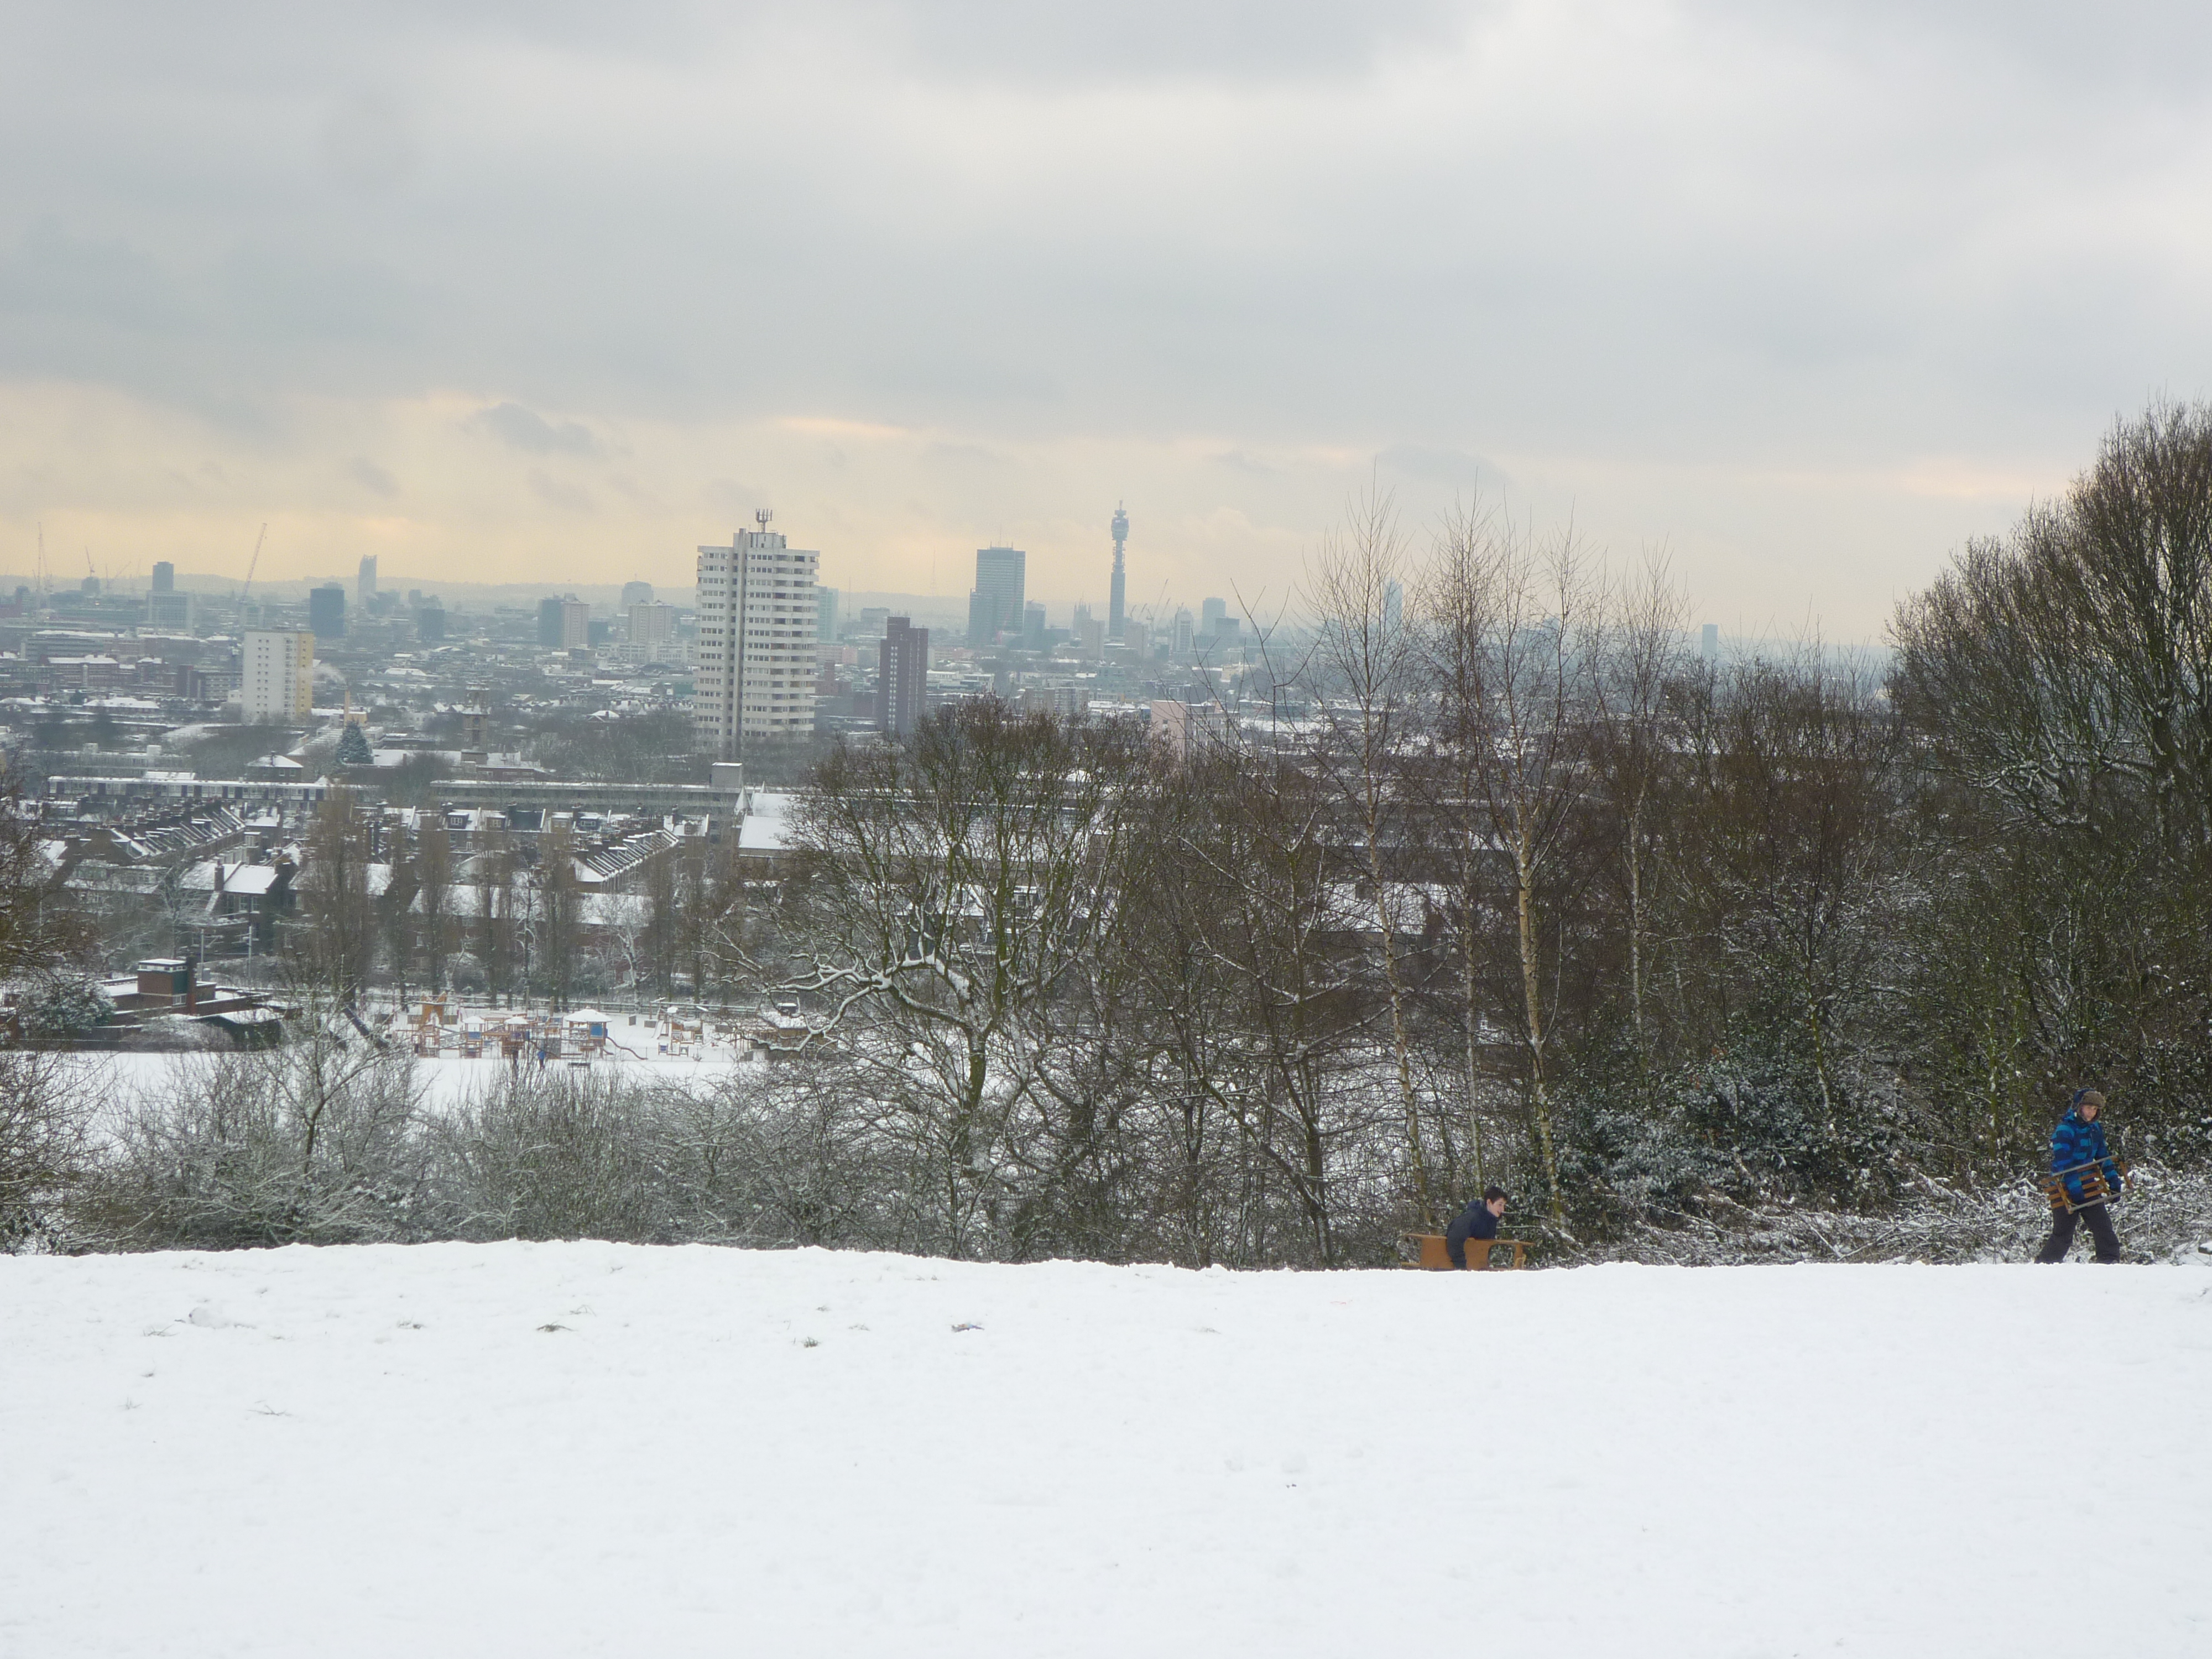 Snowy London - View from Parliament Hill